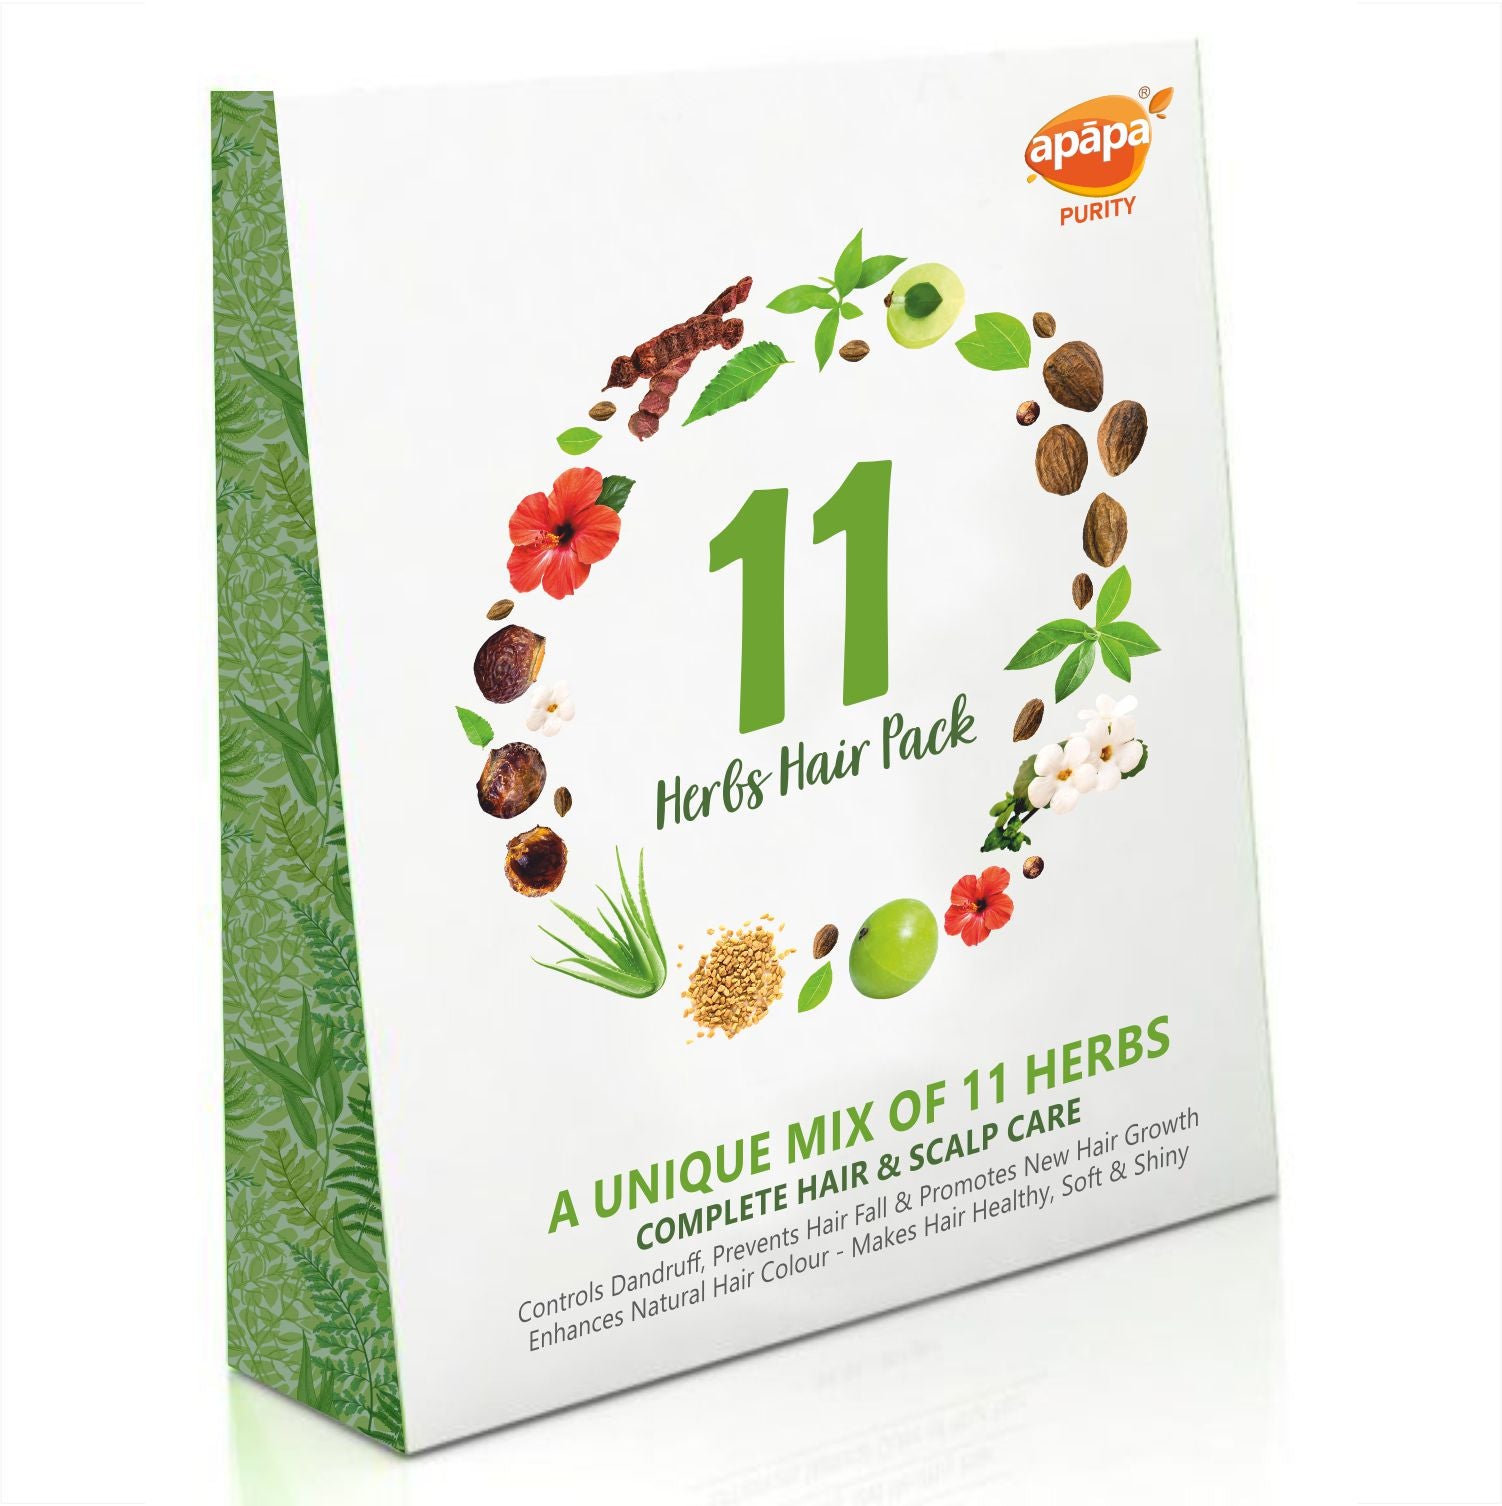 APĀPA 11 HERBS Hair Pack - Complete Hair and Scalp Care